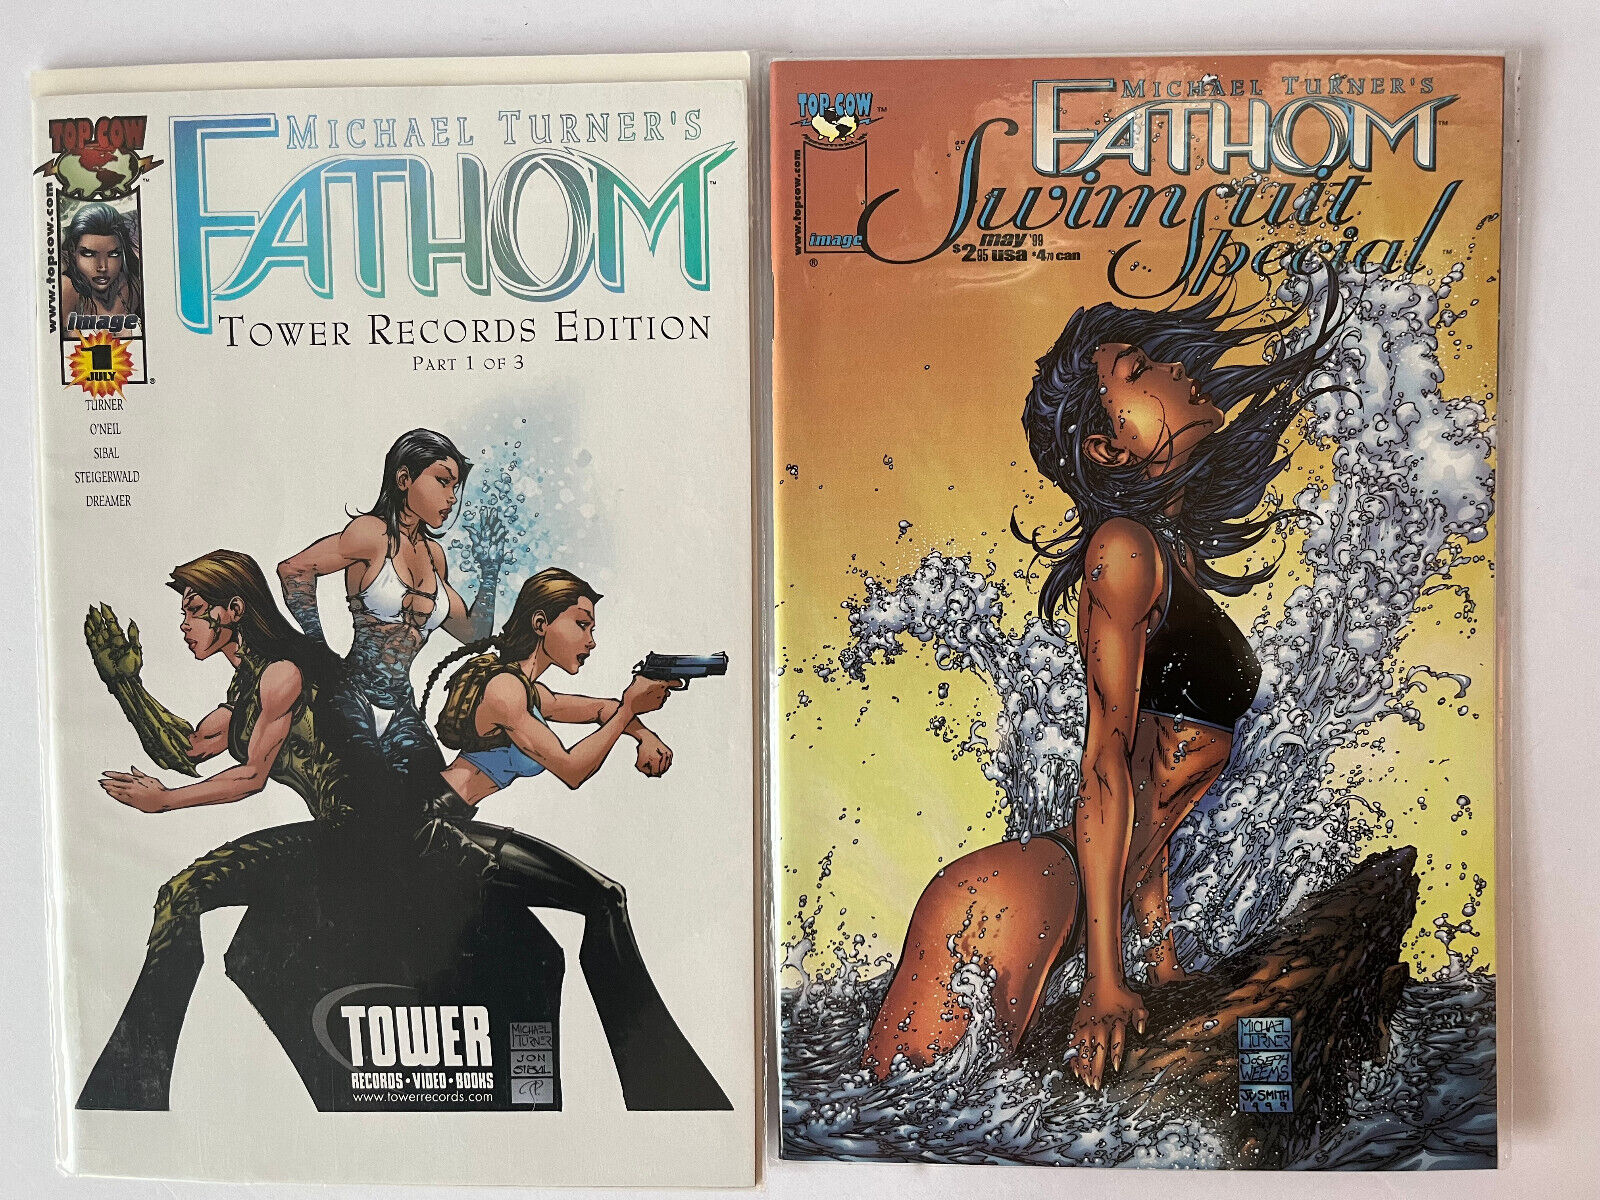 Image Comics Fathom Swimsuit Edition and Vol 1, #12 Tower Records Edition (foil)